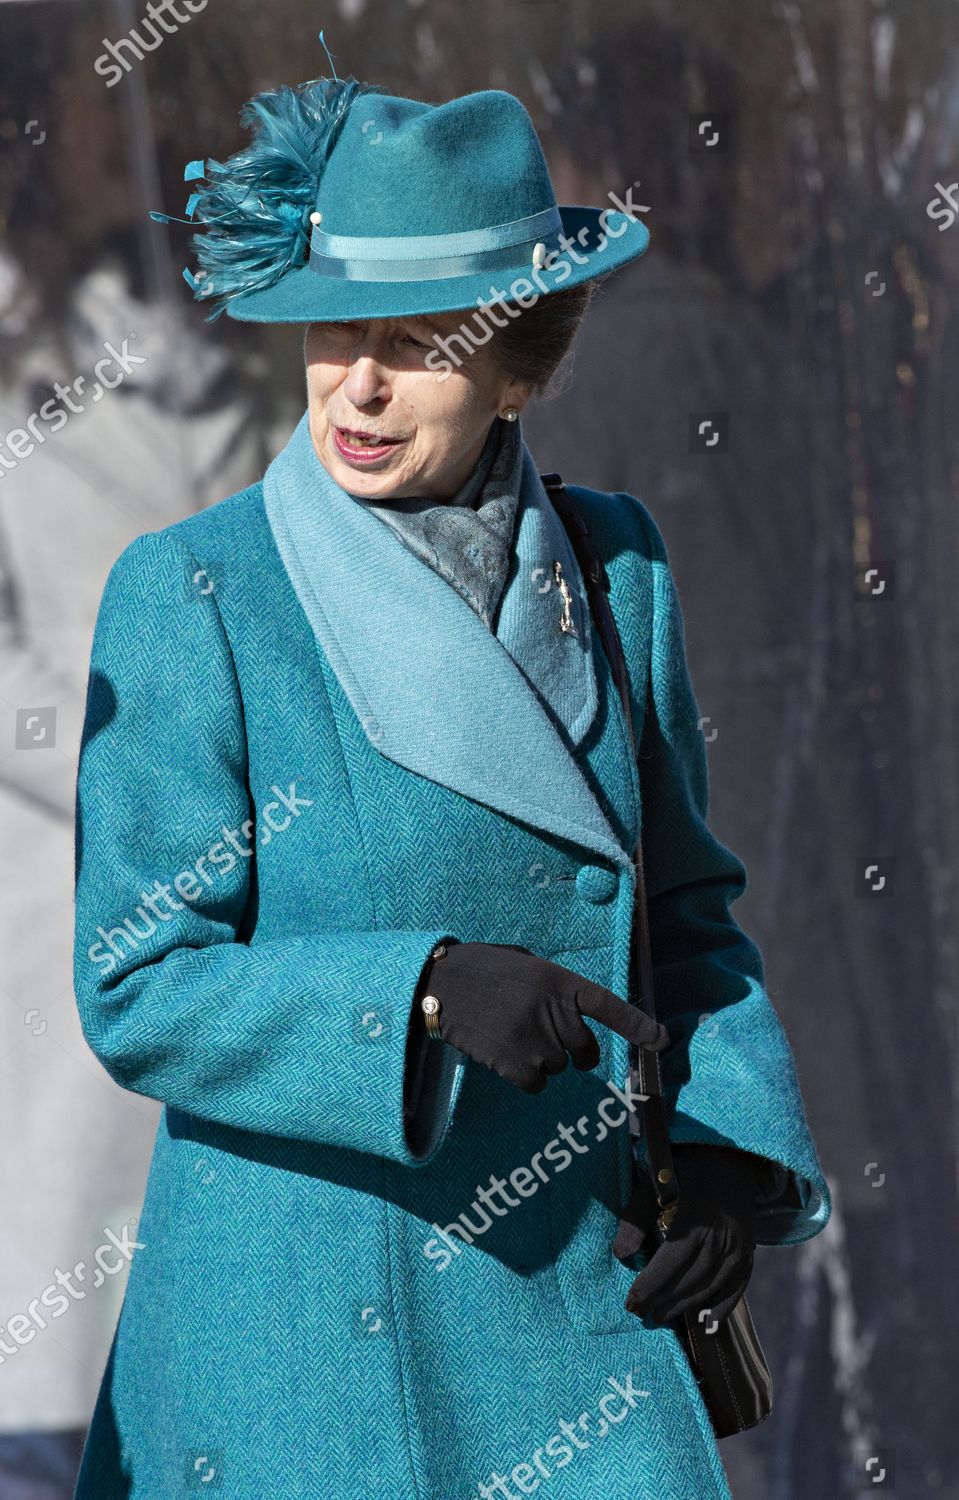 princess-anne-attends-the-royal-corps-of-signals-centenary-service-salisbury-cathedral-wiltshire-uk-shutterstock-editorial-10570519j.jpg